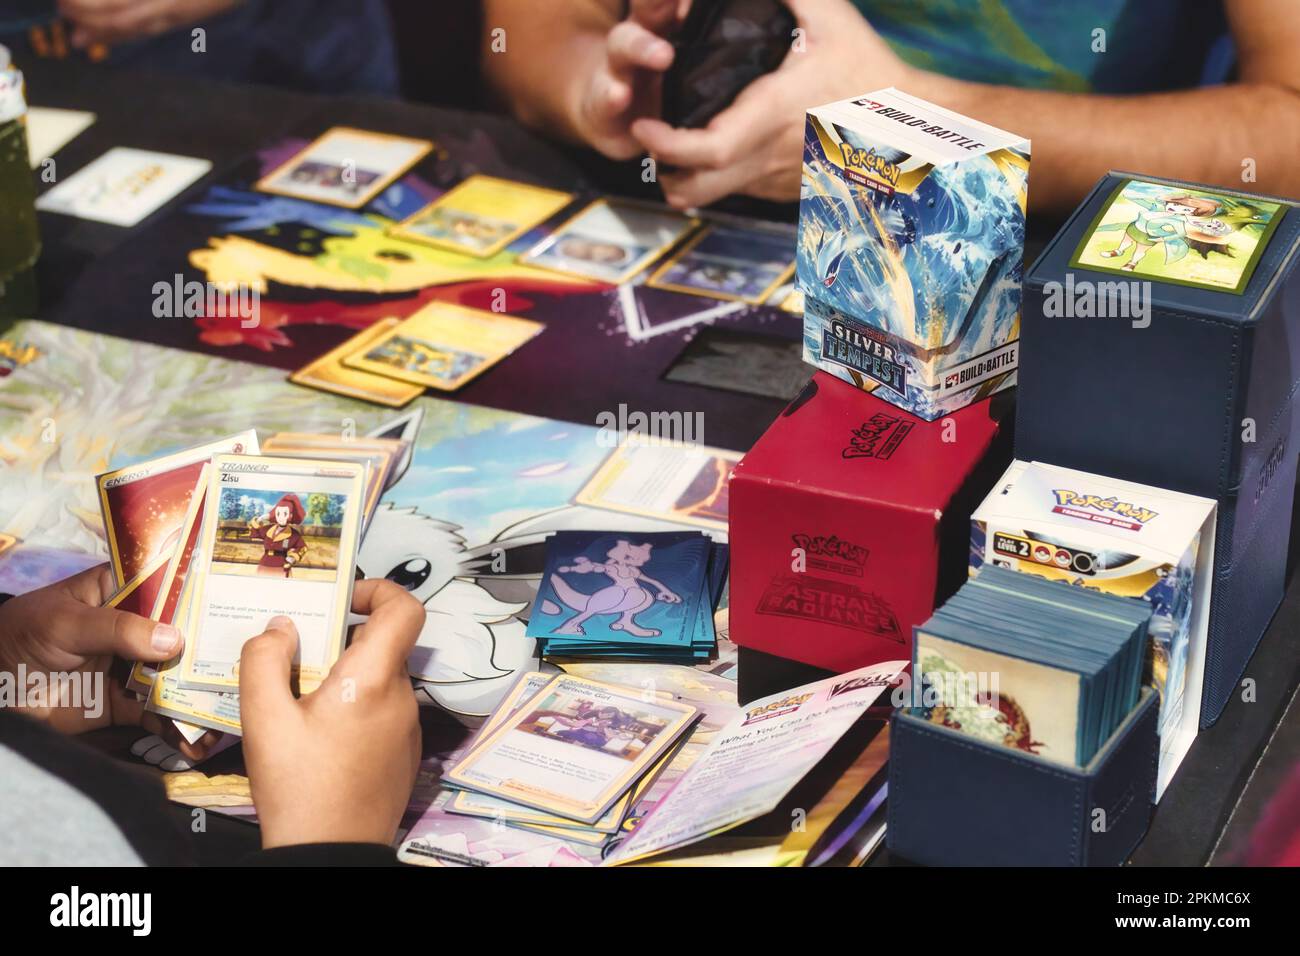 Two unrecognizable white Caucasian kids playing with Pokemon trading cards on a table Stock Photo